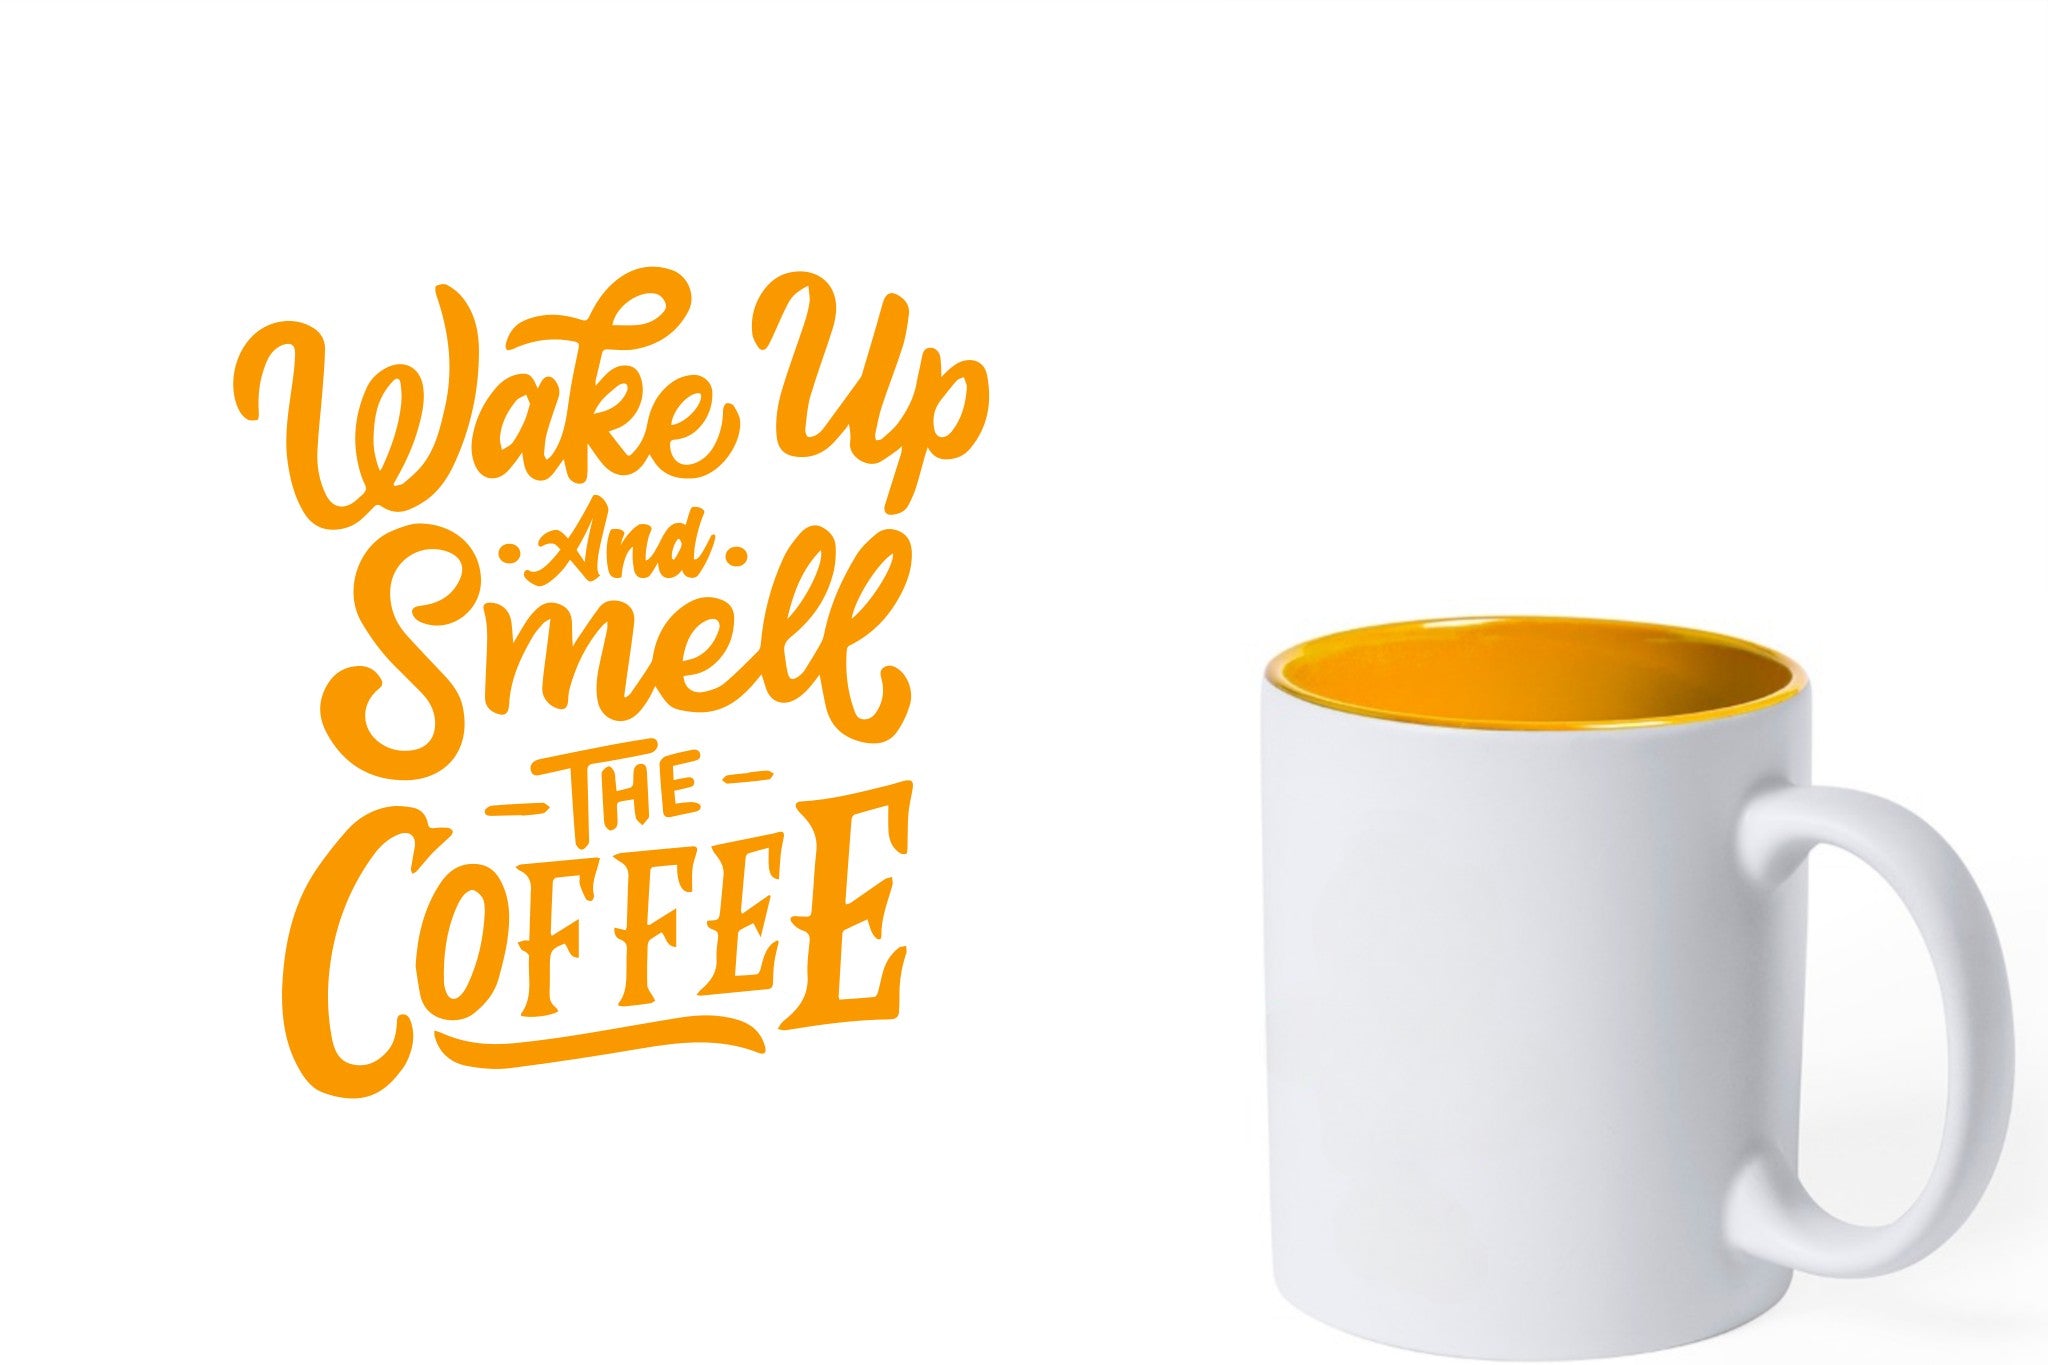 witte keramische mok met gele gravure  'Wake up and smell the coffee'.